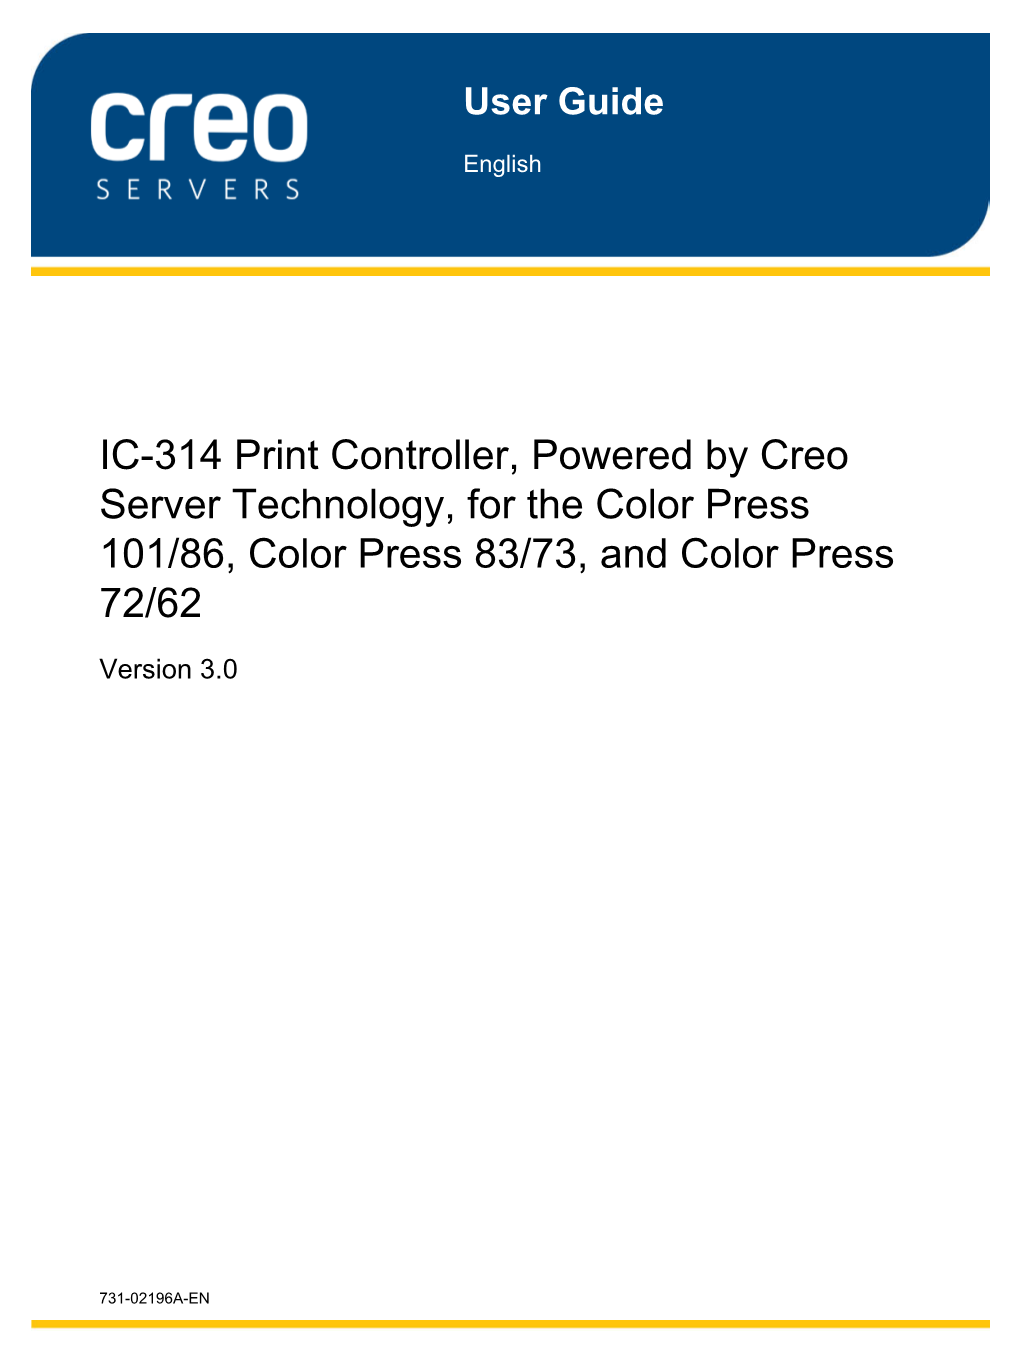 IC-314 Print Controller, Powered by Creo Server Technology, for the Color Press 101/86, Color Press 83/73, and Color Press 72/62